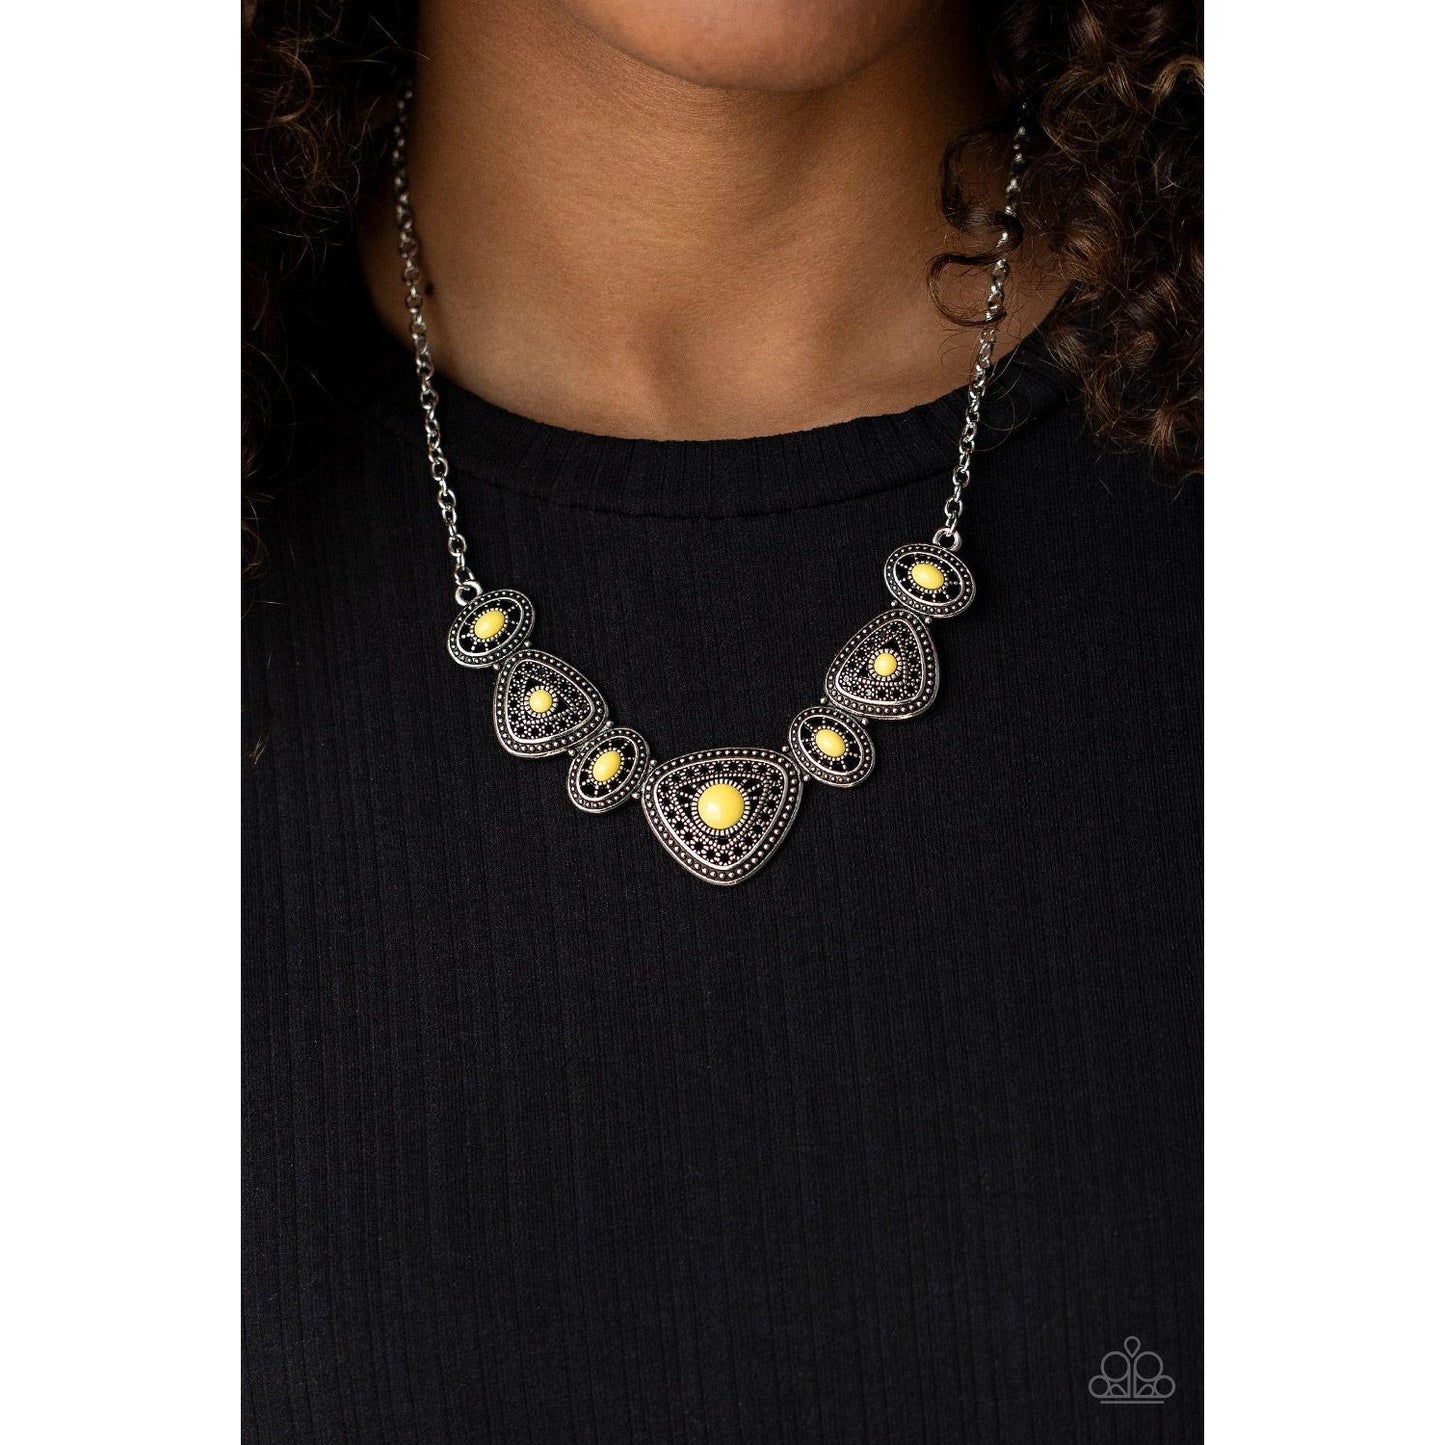 Totally TERRA-torial – Yellow Necklace